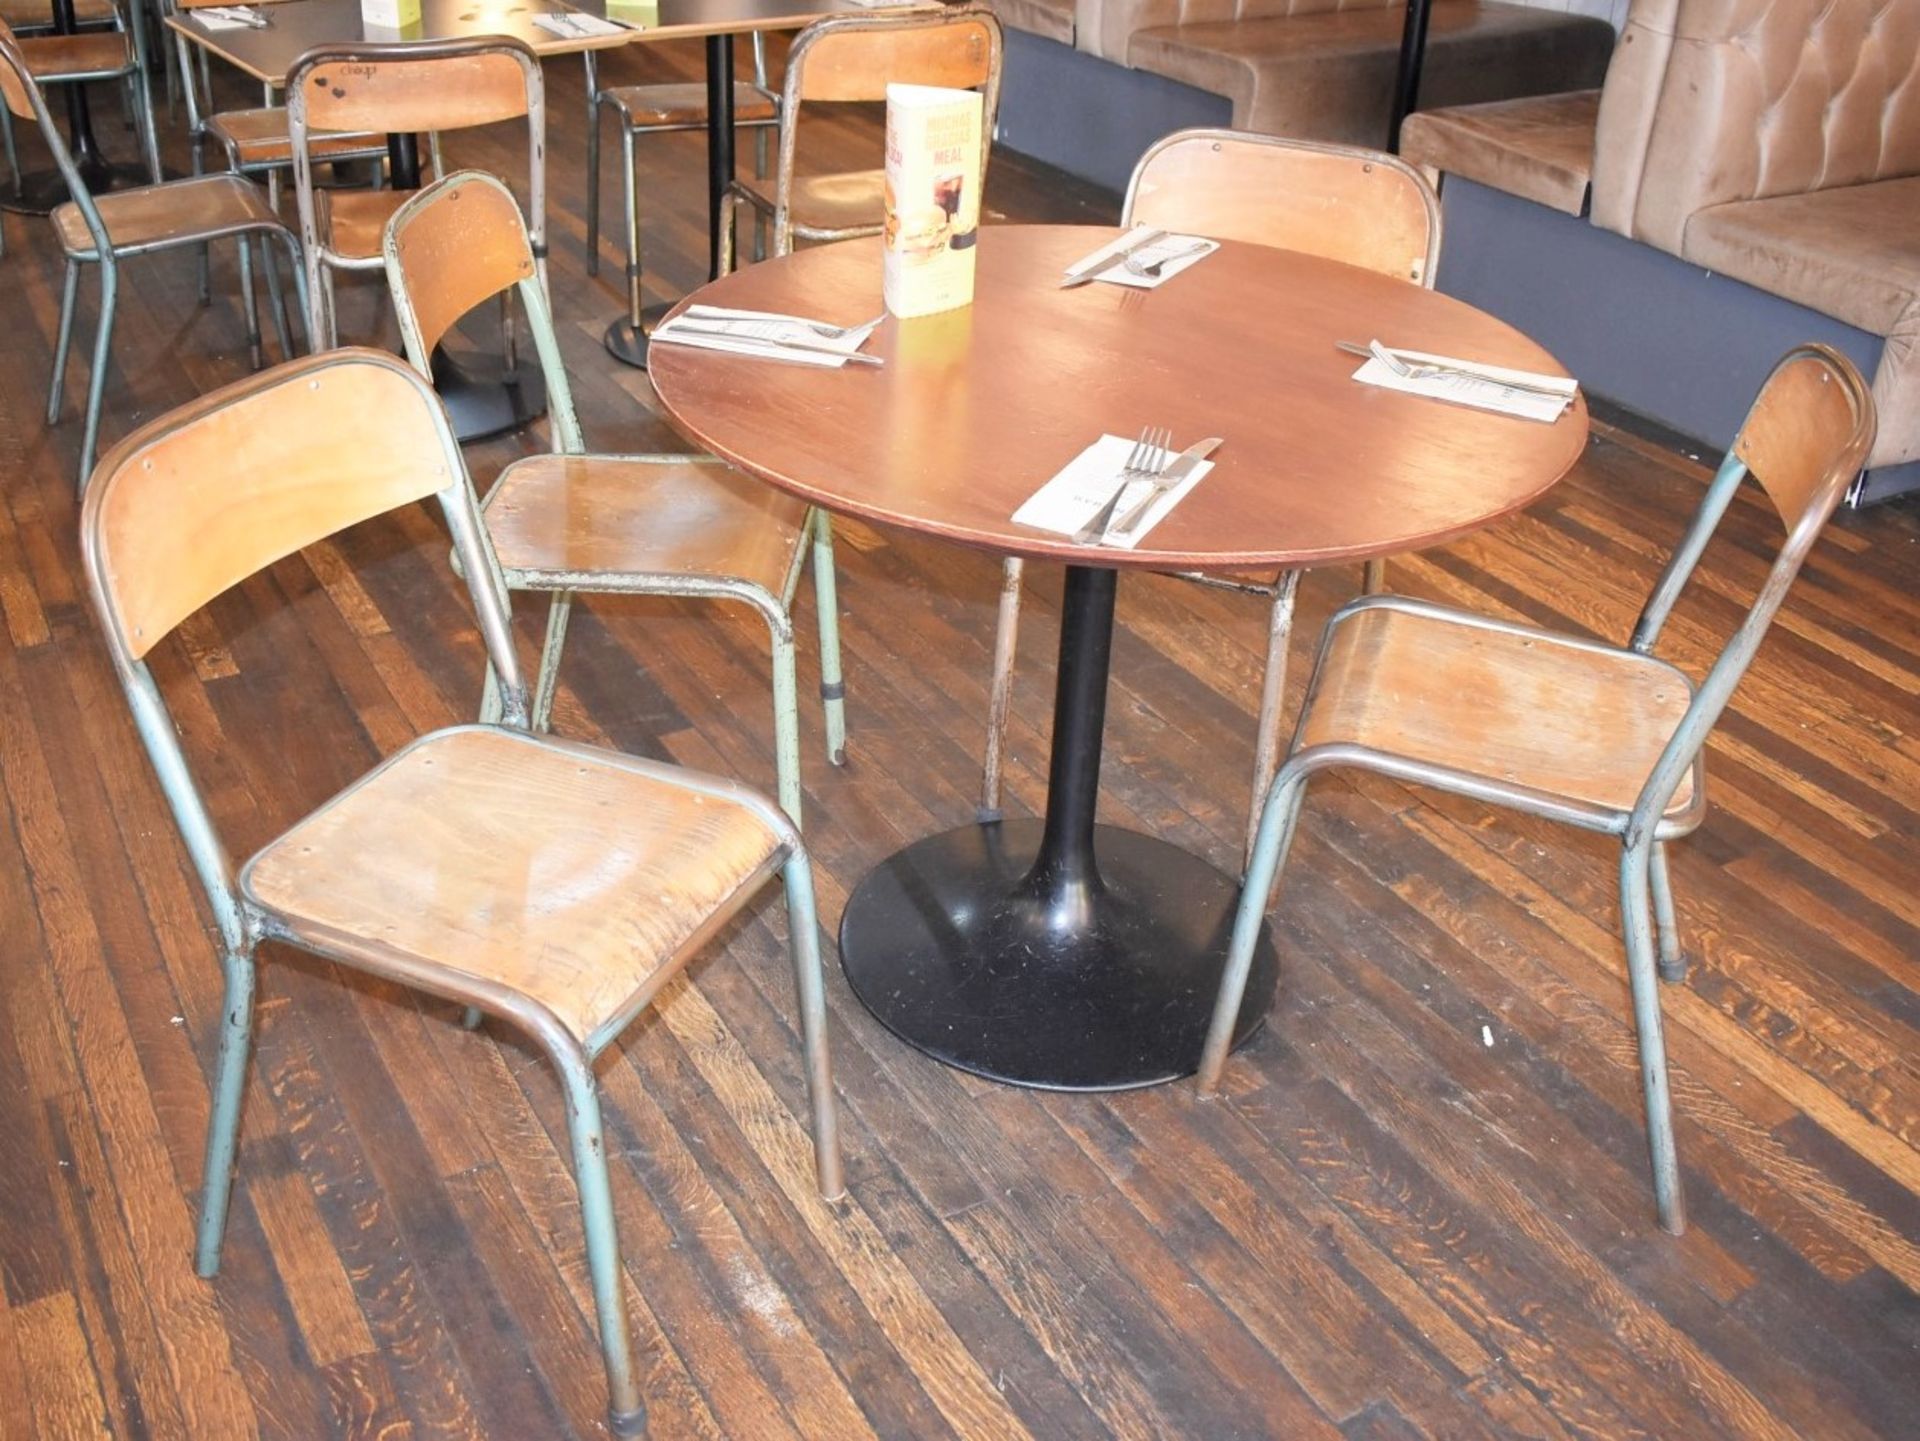 8 x Vintage Stackable School Chairs With Tubular Bent Steel Frames and Curved Plywood Seats - Image 2 of 8